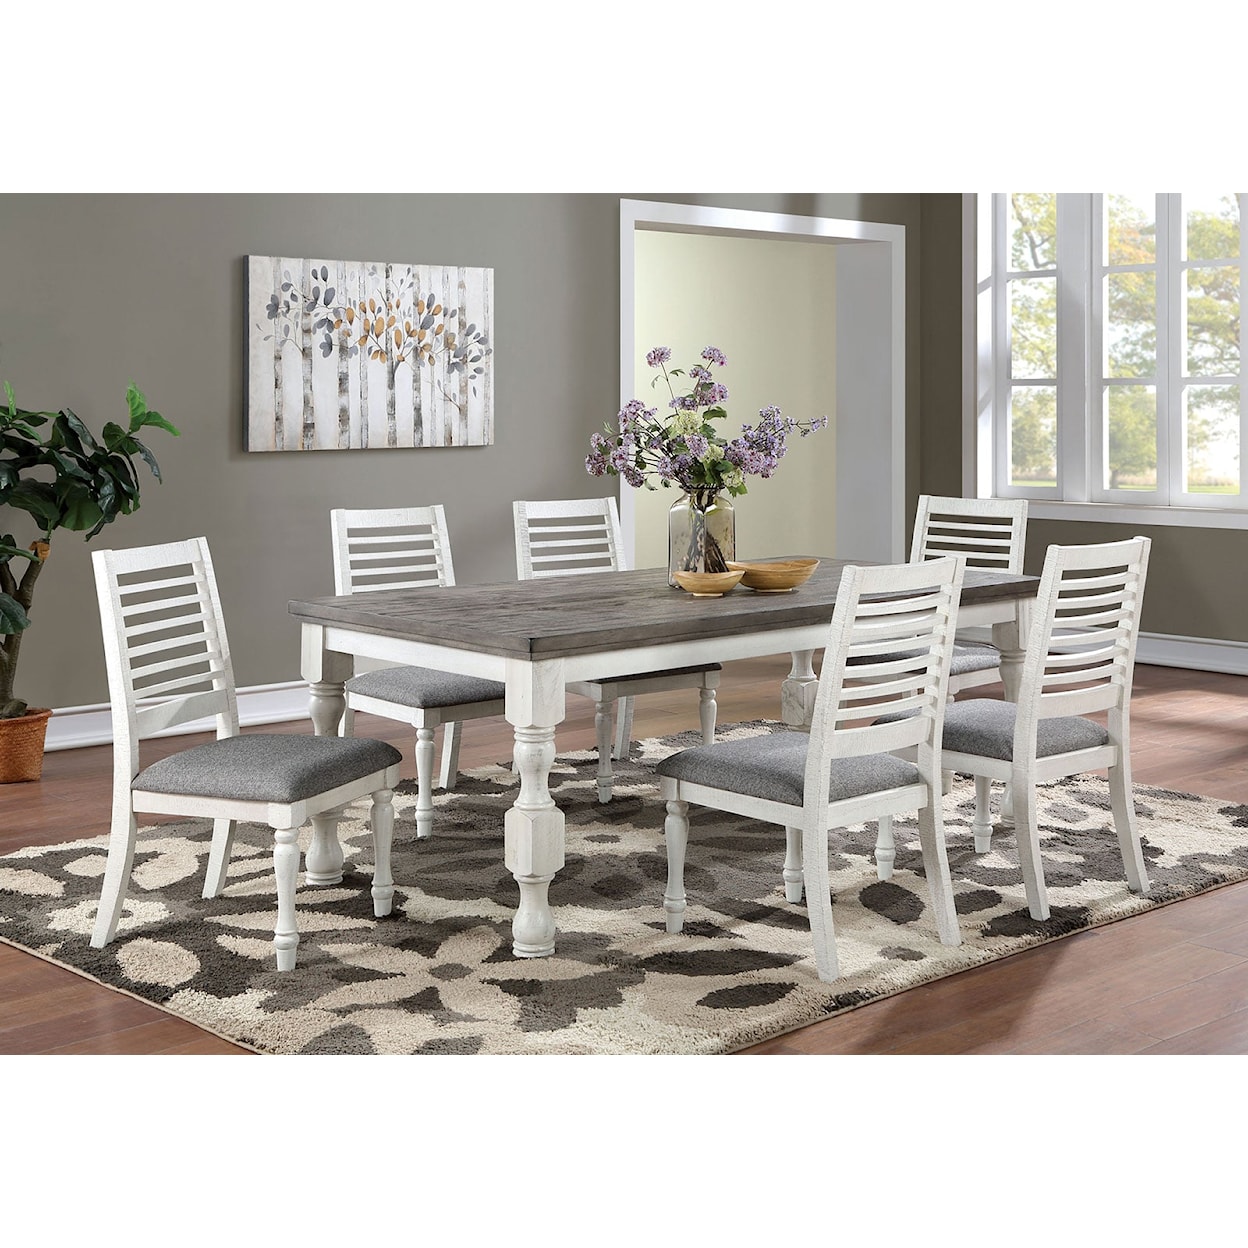 Furniture of America Calabria Dining Table